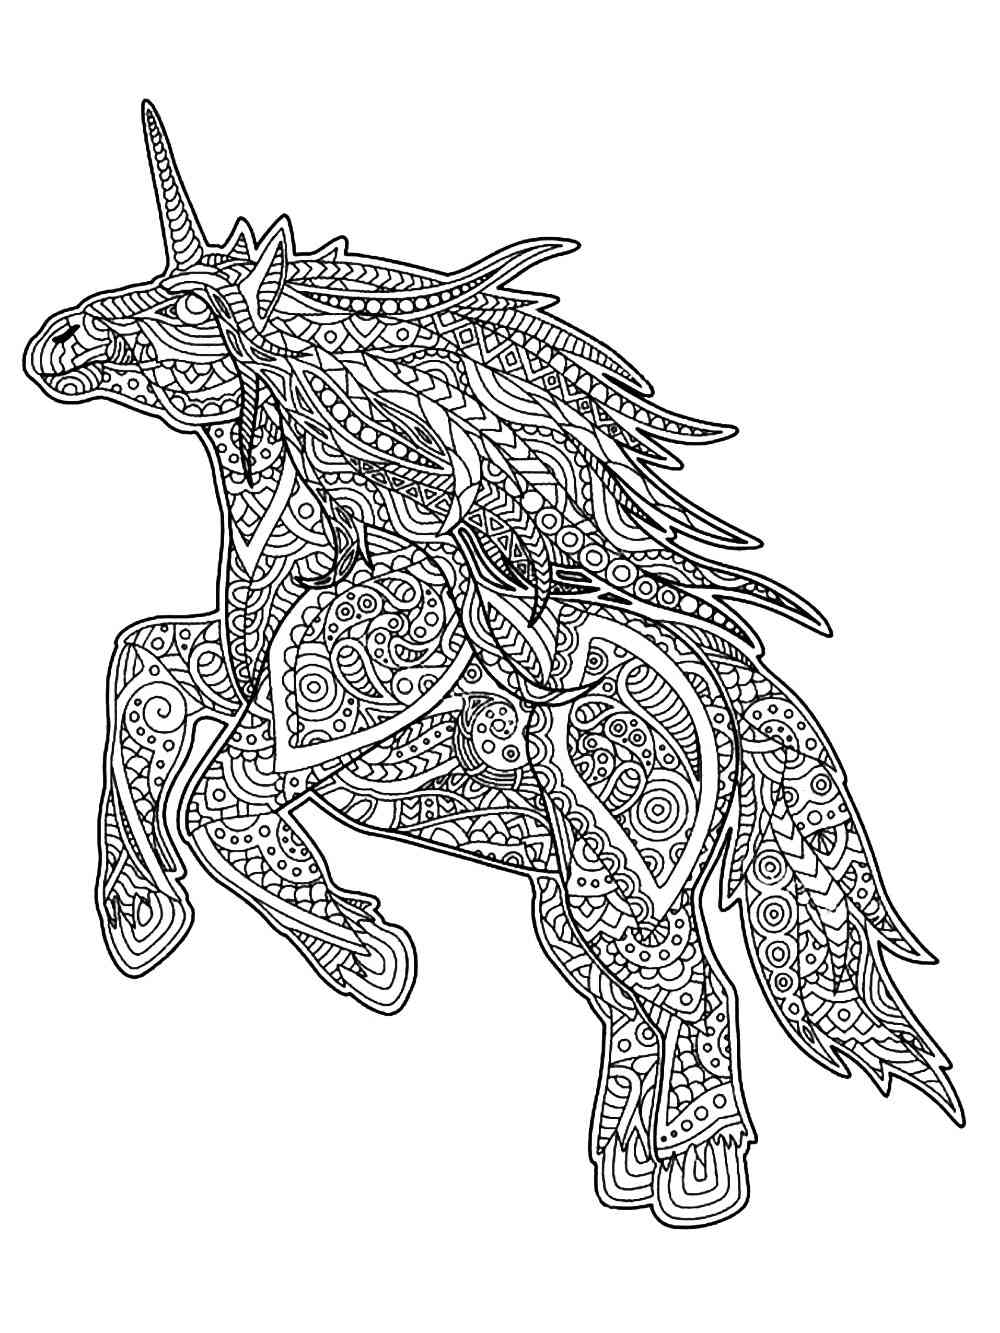 Unicorn coloring pages for Adults